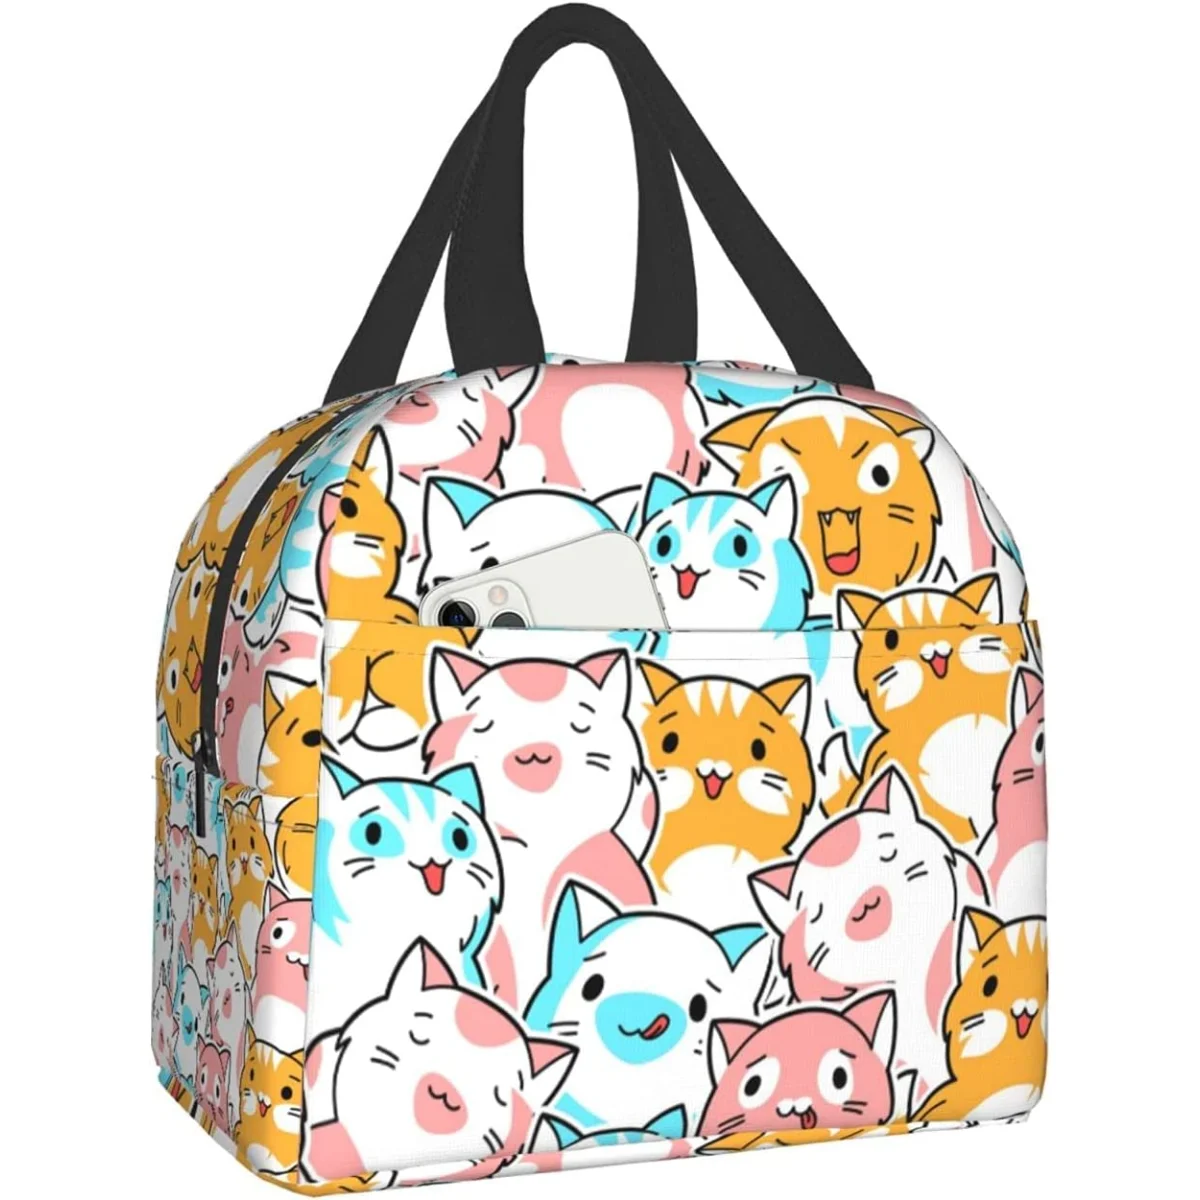 

Kawaii Cats Fun Animal Lunch Bag Tote Bag Lunch Bag For Lunch Box Insulated Lunch Container For Schools Work Travel Outdoors